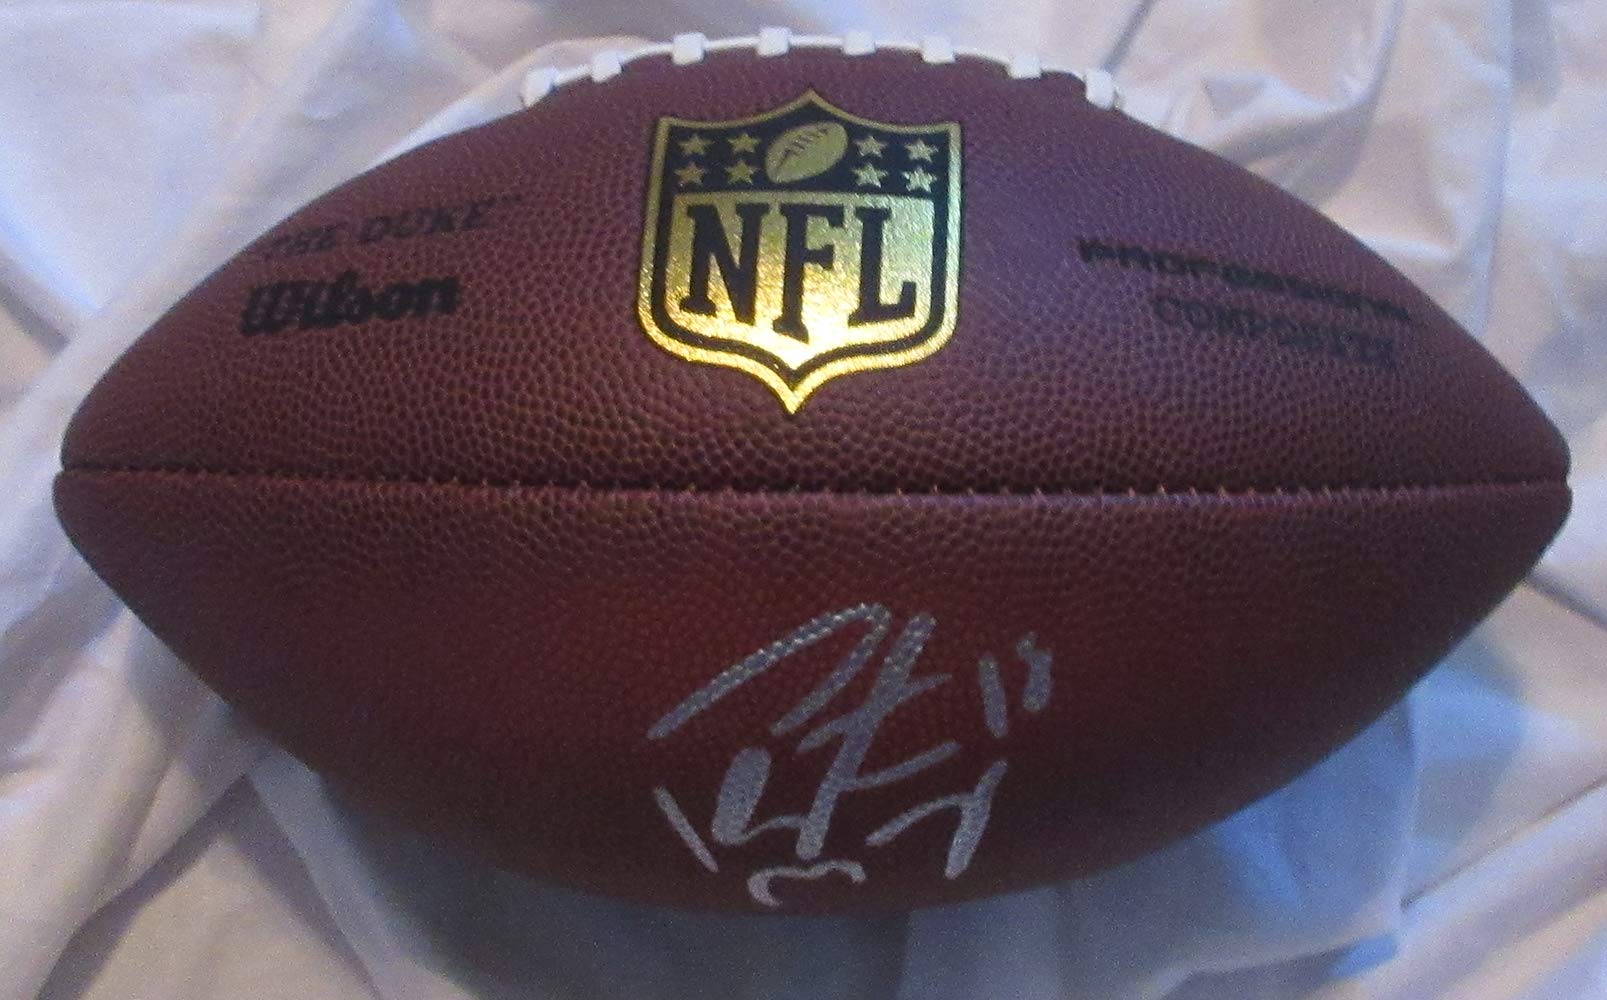 Peyton Manning Autographed Wilson NFL Shield Football W/PROOF, Picture of Peyton Signing For Us, Super Bowl Champion, MVP, Pro Bowl